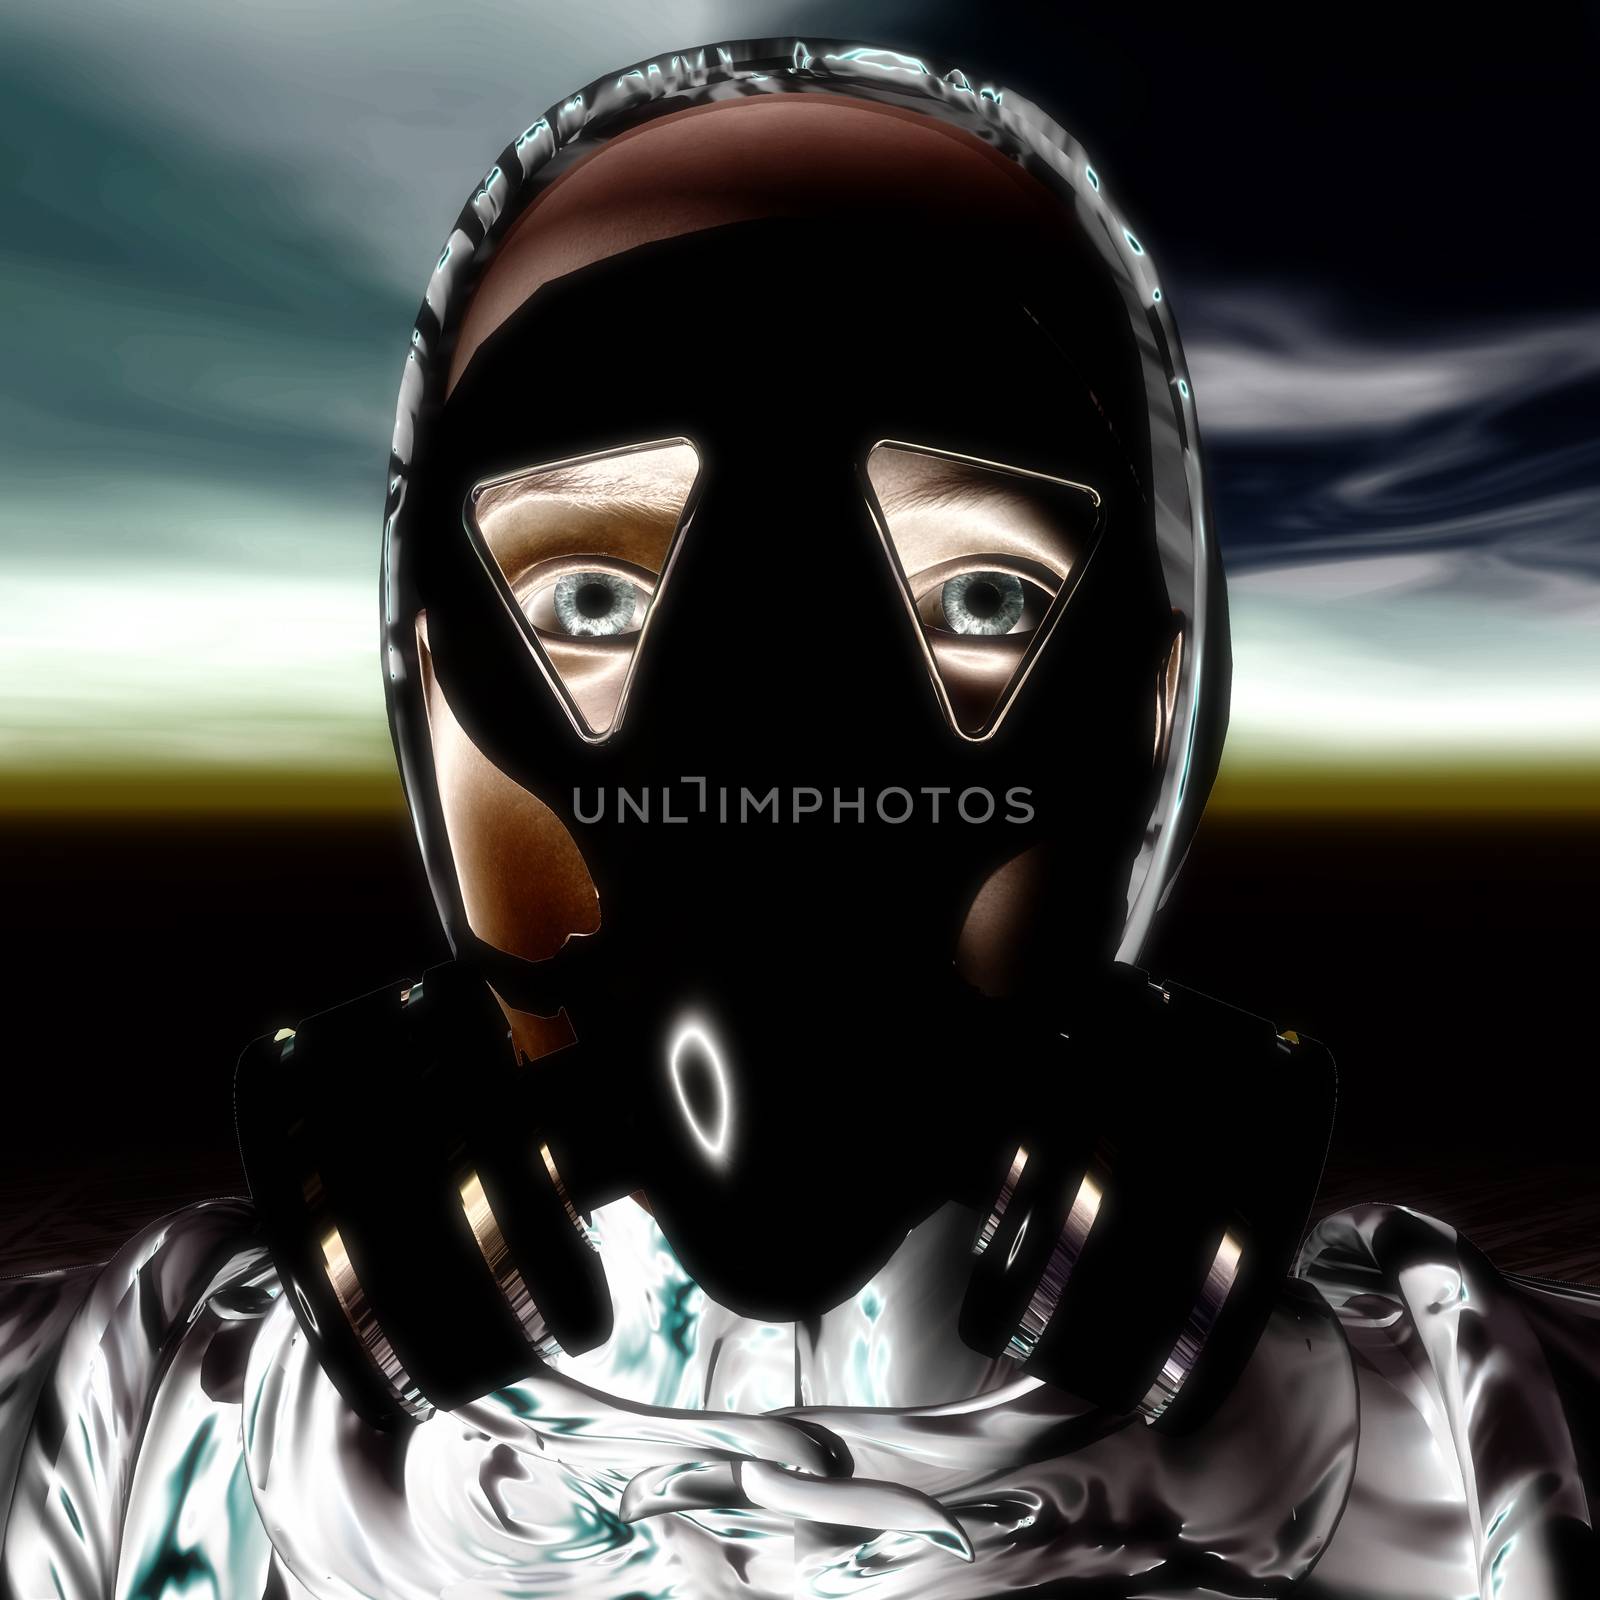 3D Illustration, 3D Rendering of a Protection Mask by 3quarks